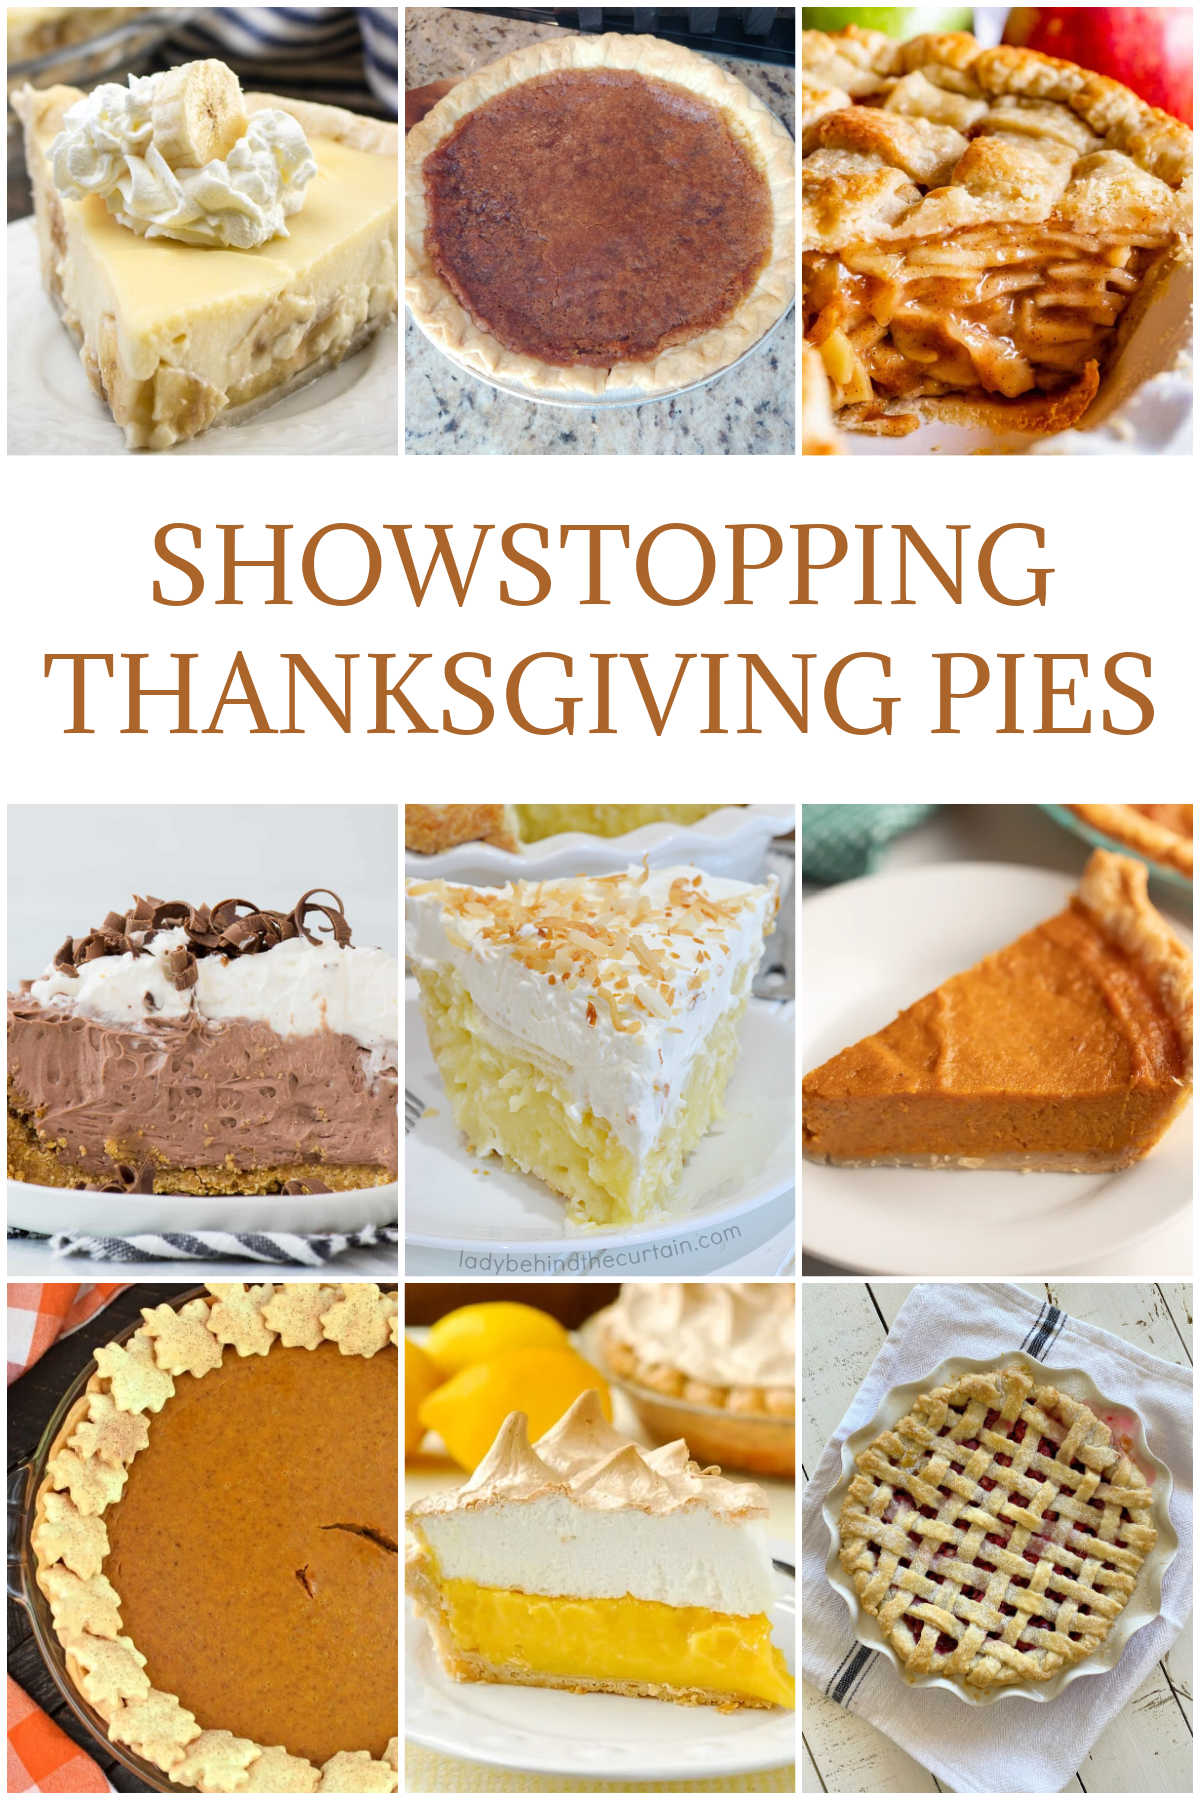 Collage of Pies for Thanksgiving